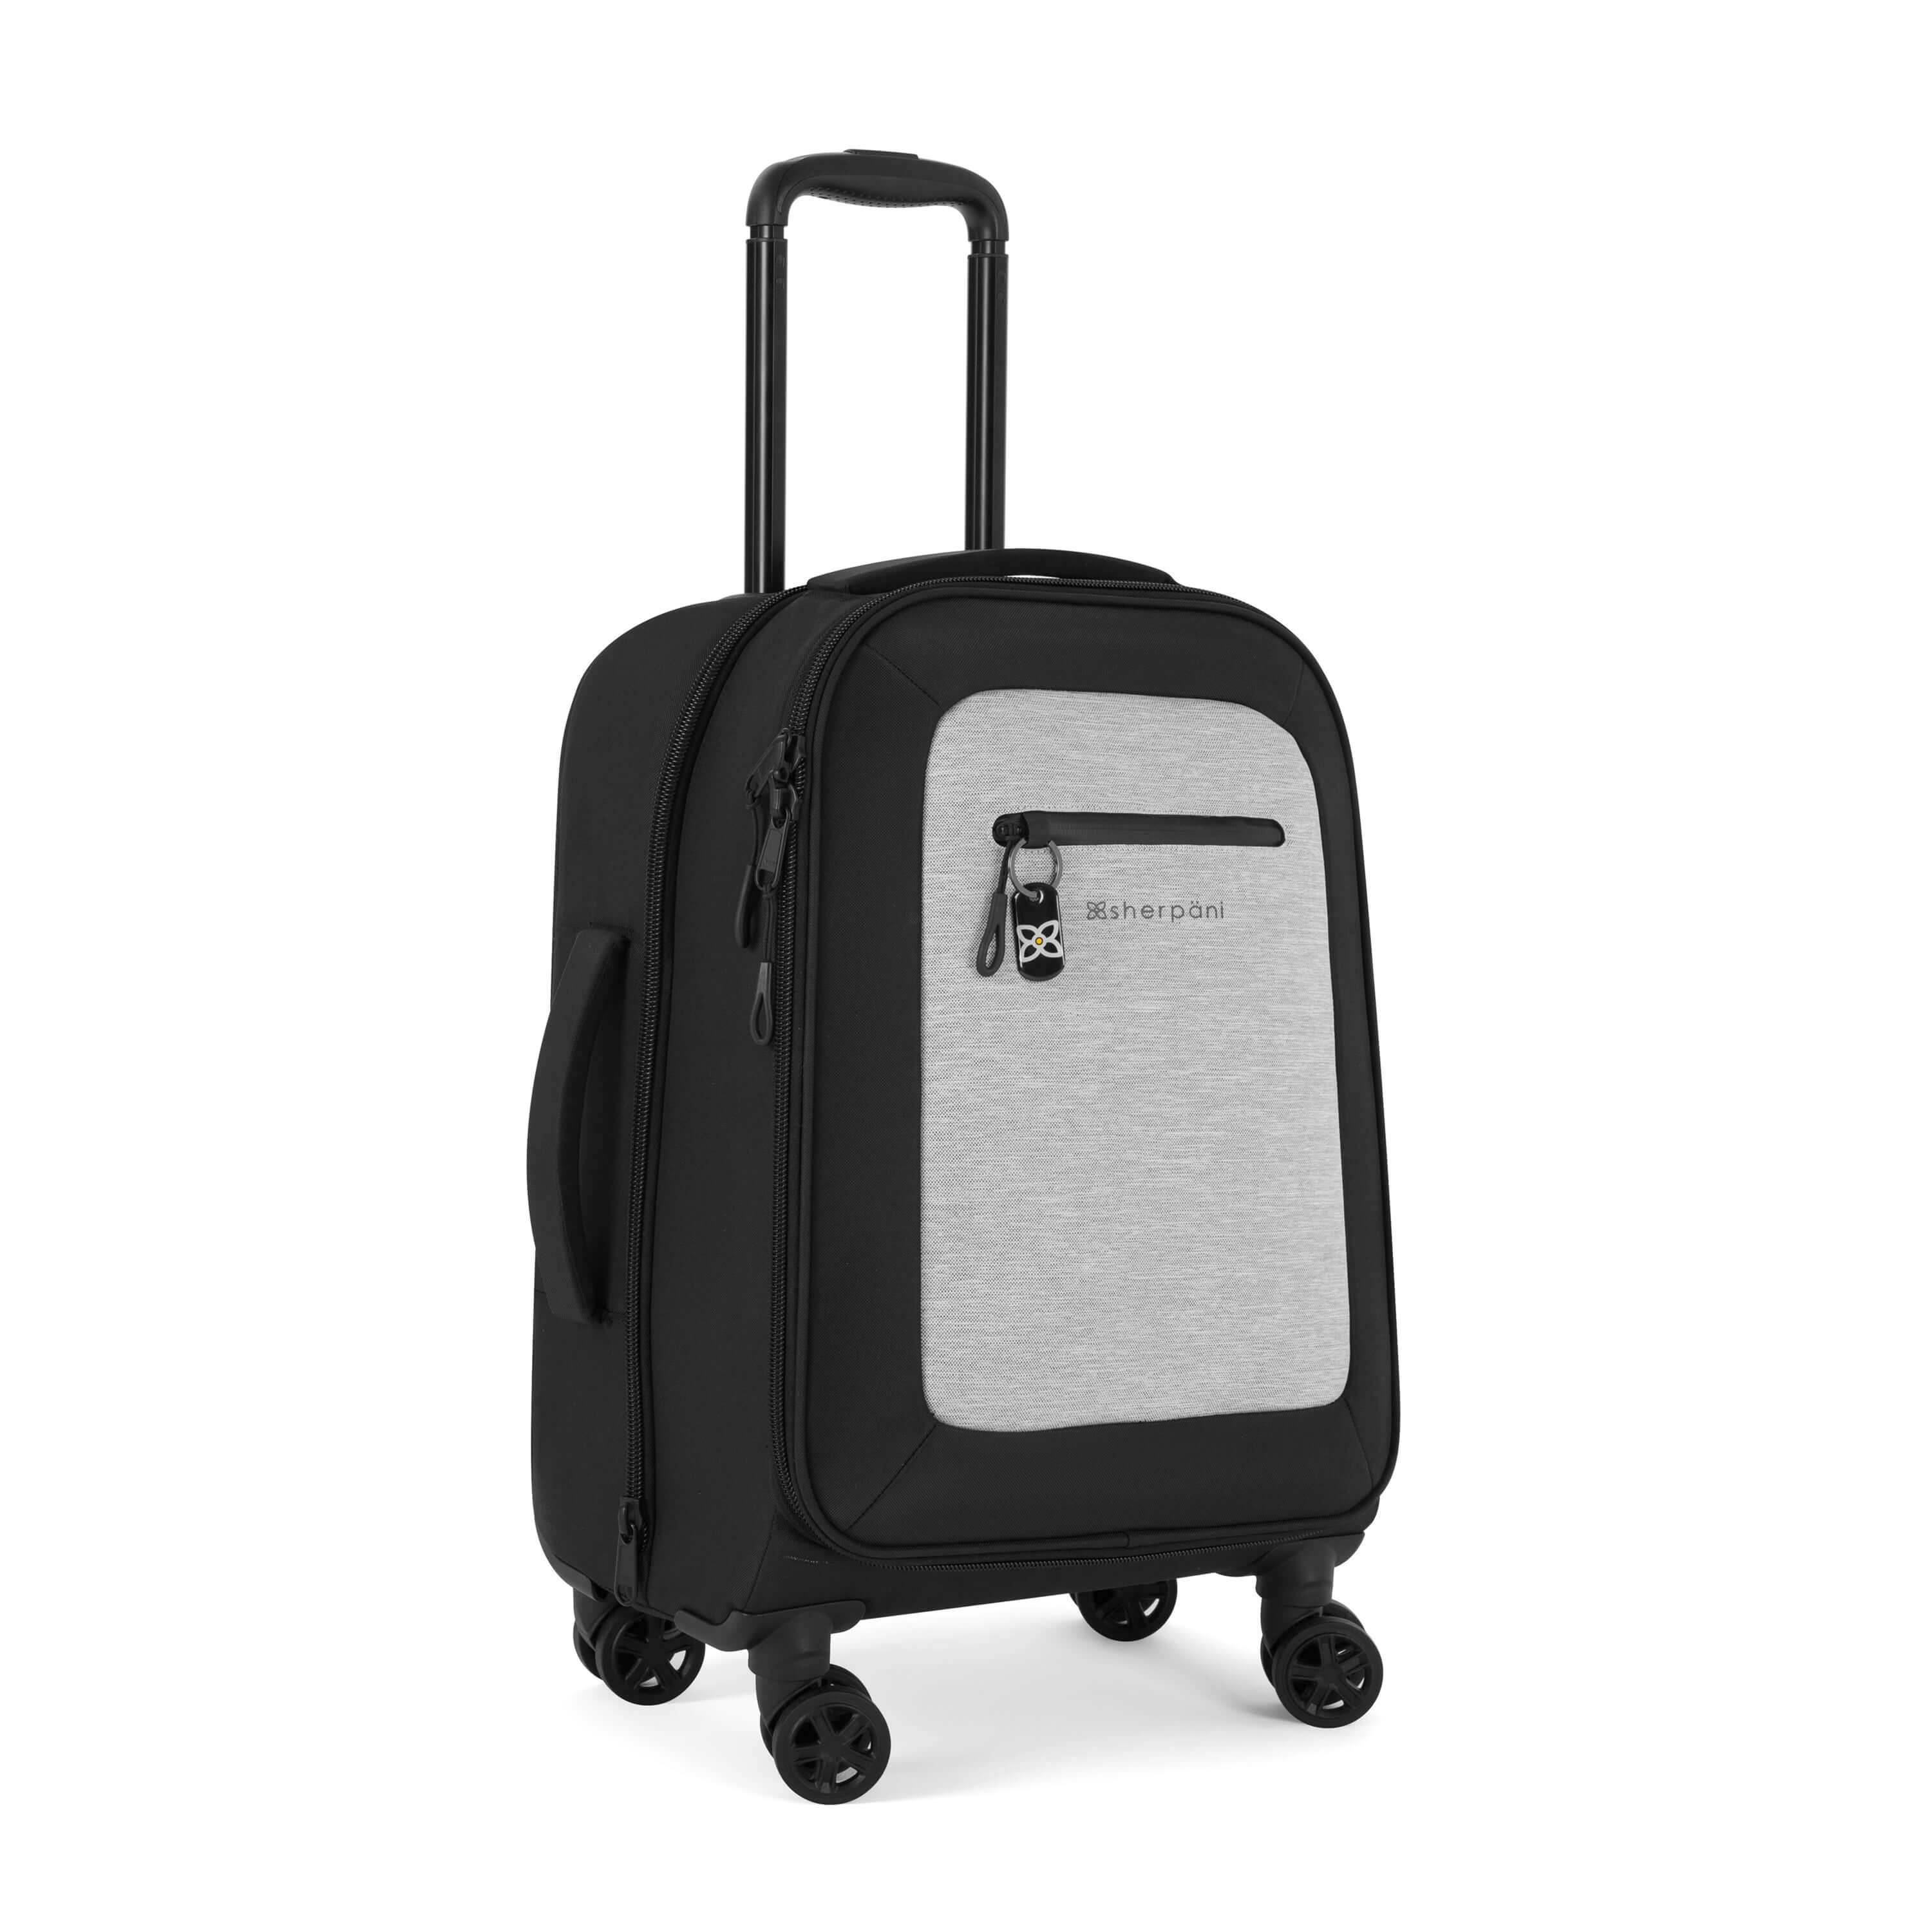 Angled front view of Sherpani's Anti-Theft luggage the Latitude in Sterling. The suitcase has a soft shell exterior made from recycled plastic bottles and features vegan leather accents in black. 